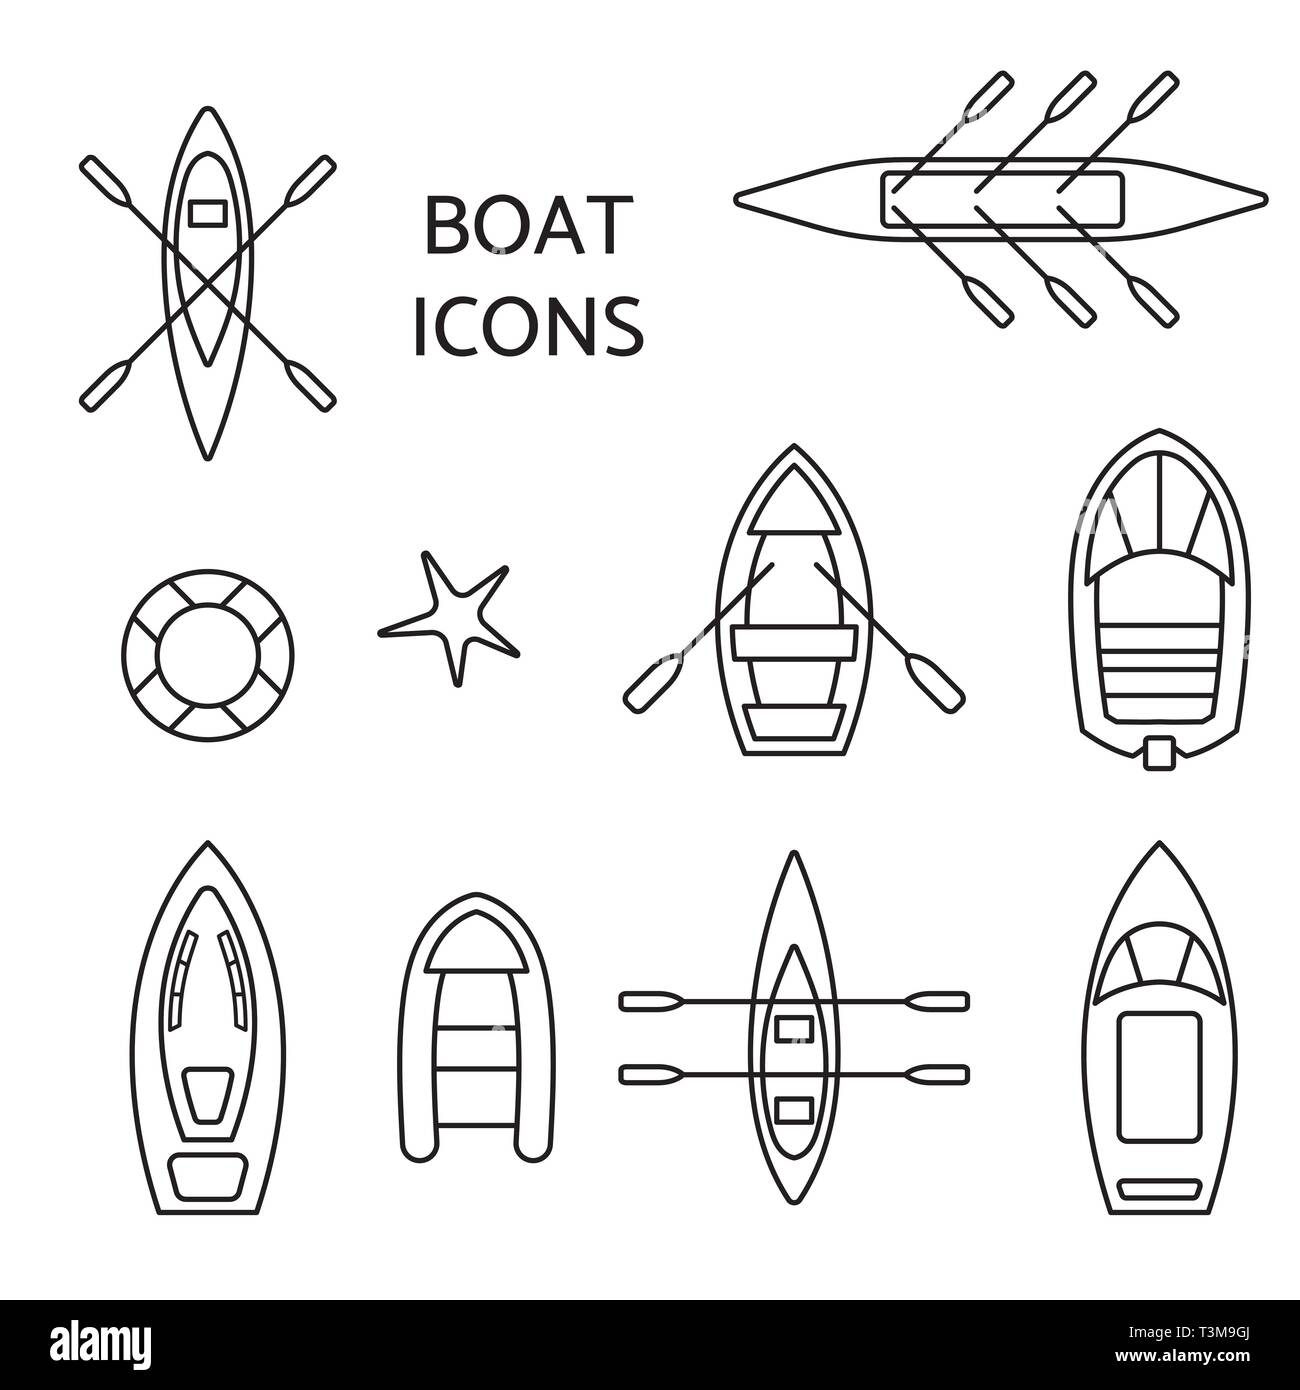 Boat icons outline set. Stock Vector